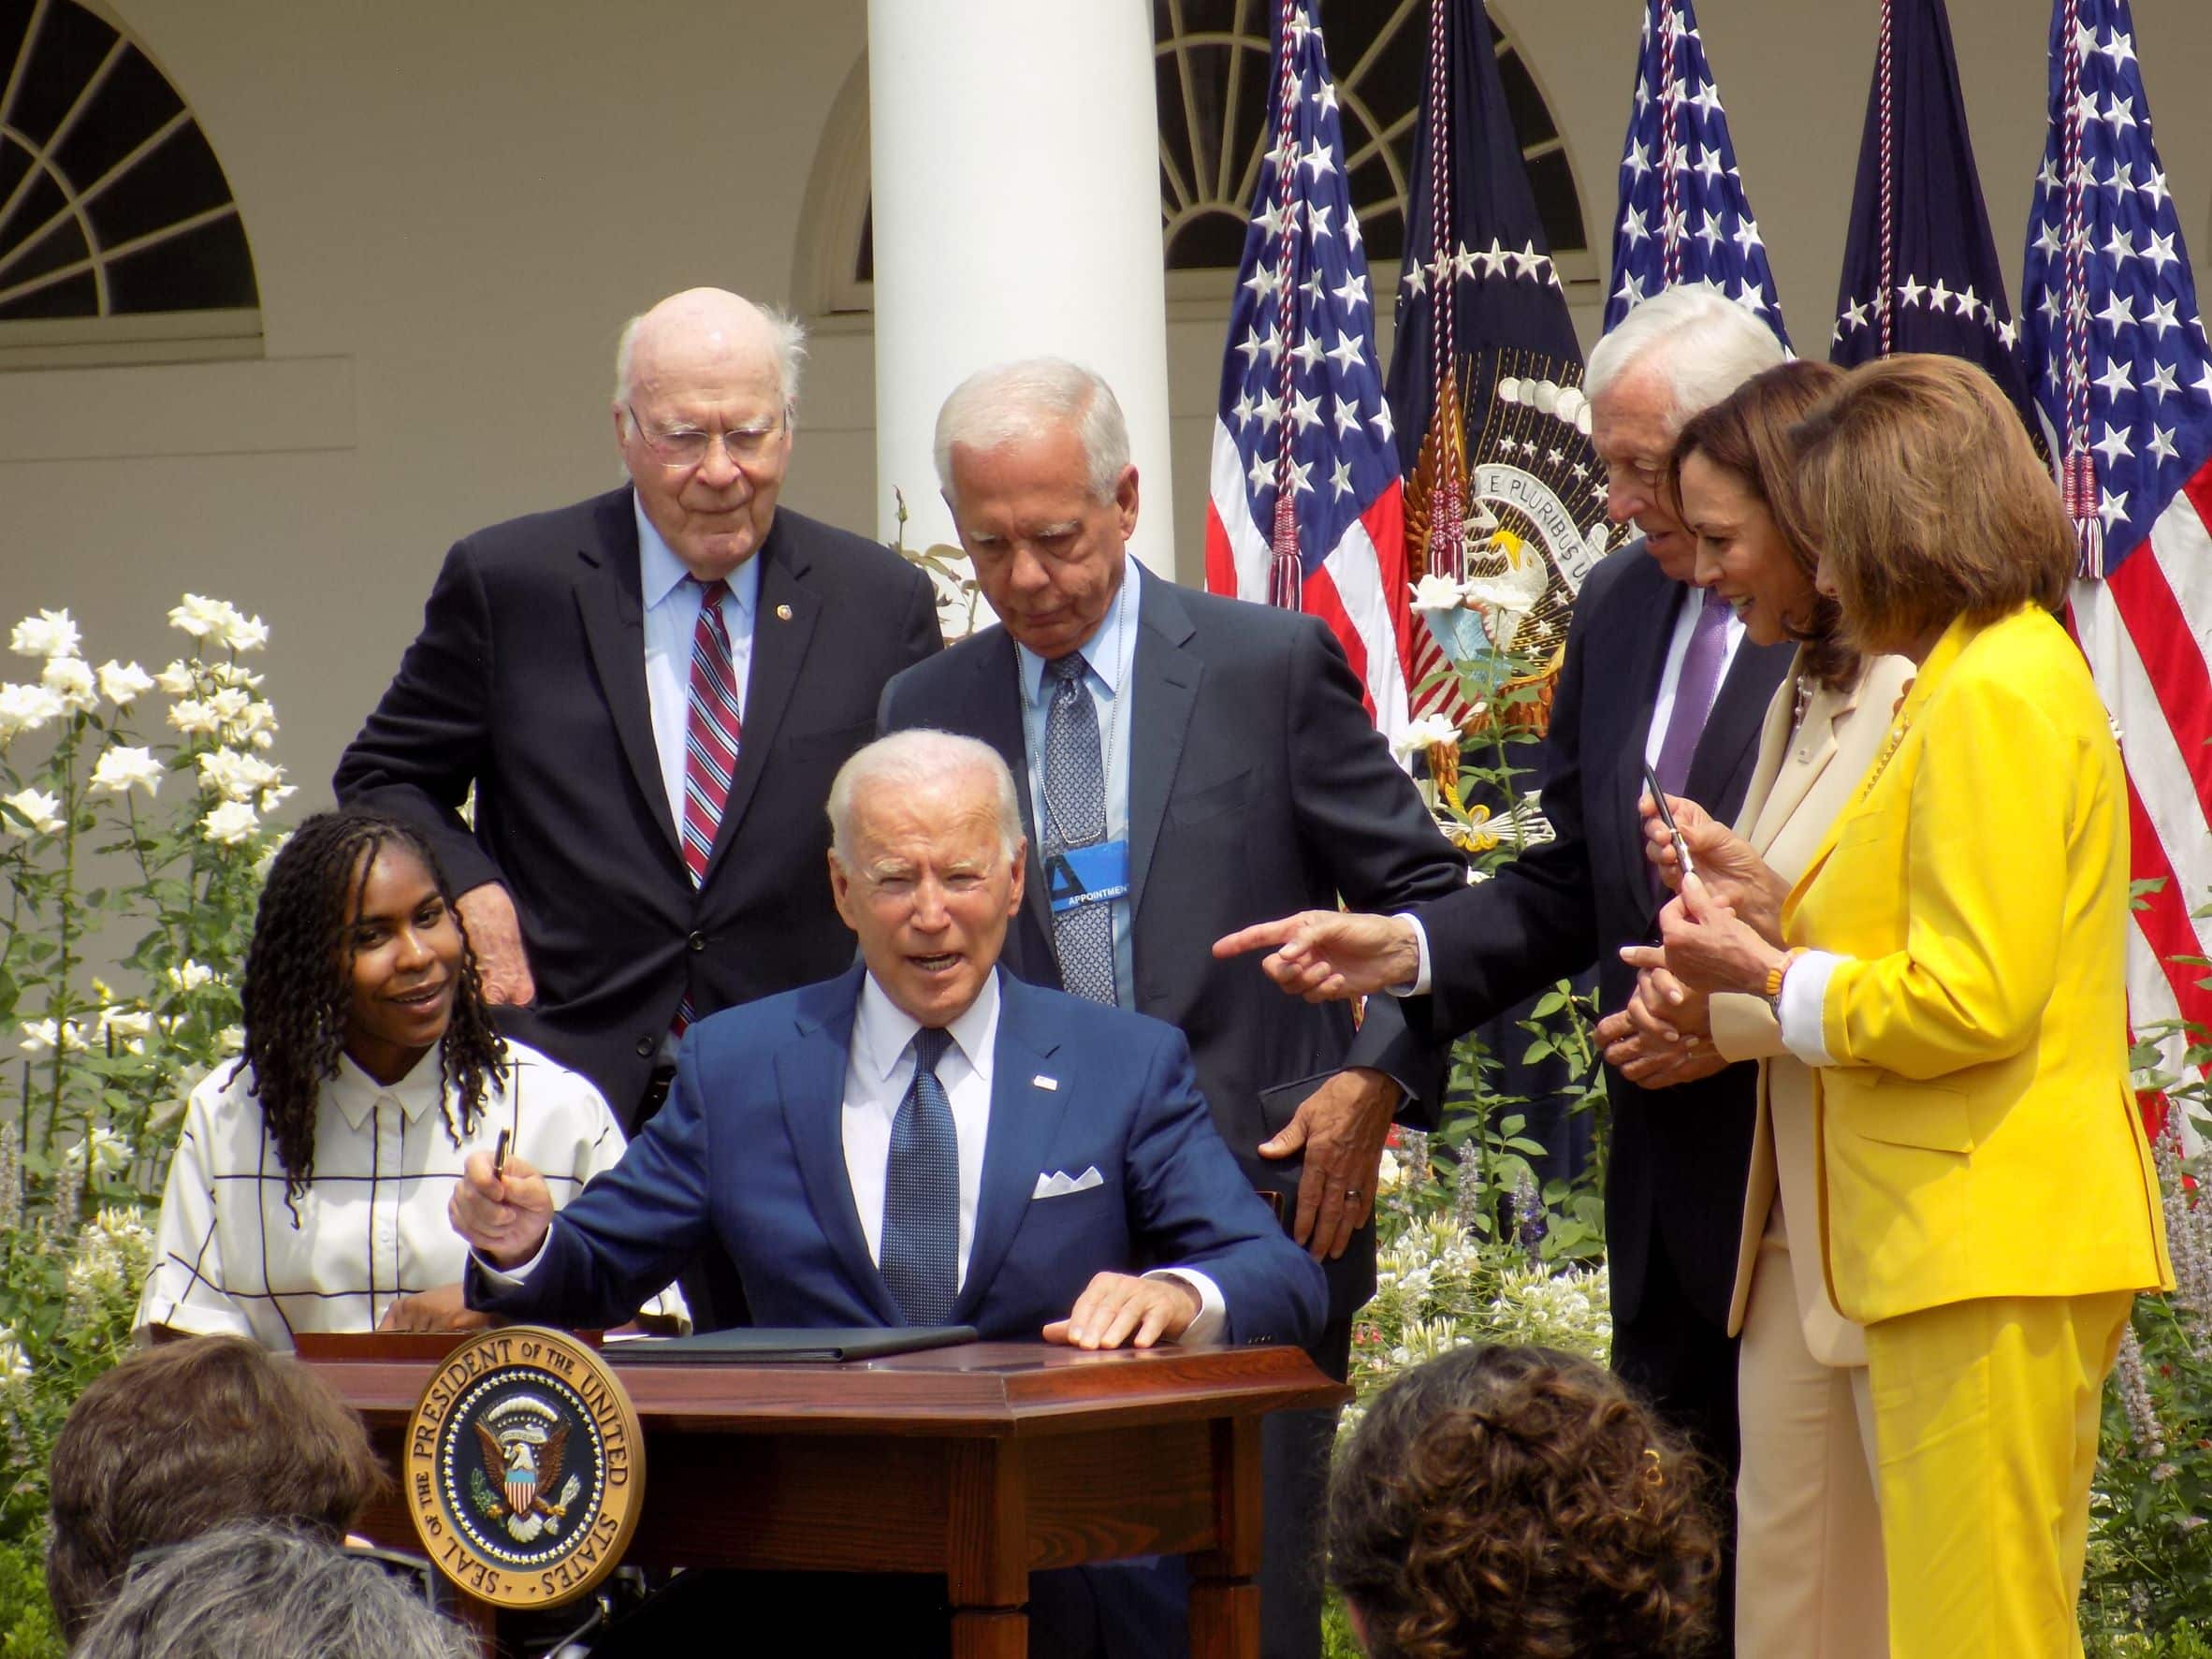 Biden, Harris Celebrate Americans with Disabilities Act